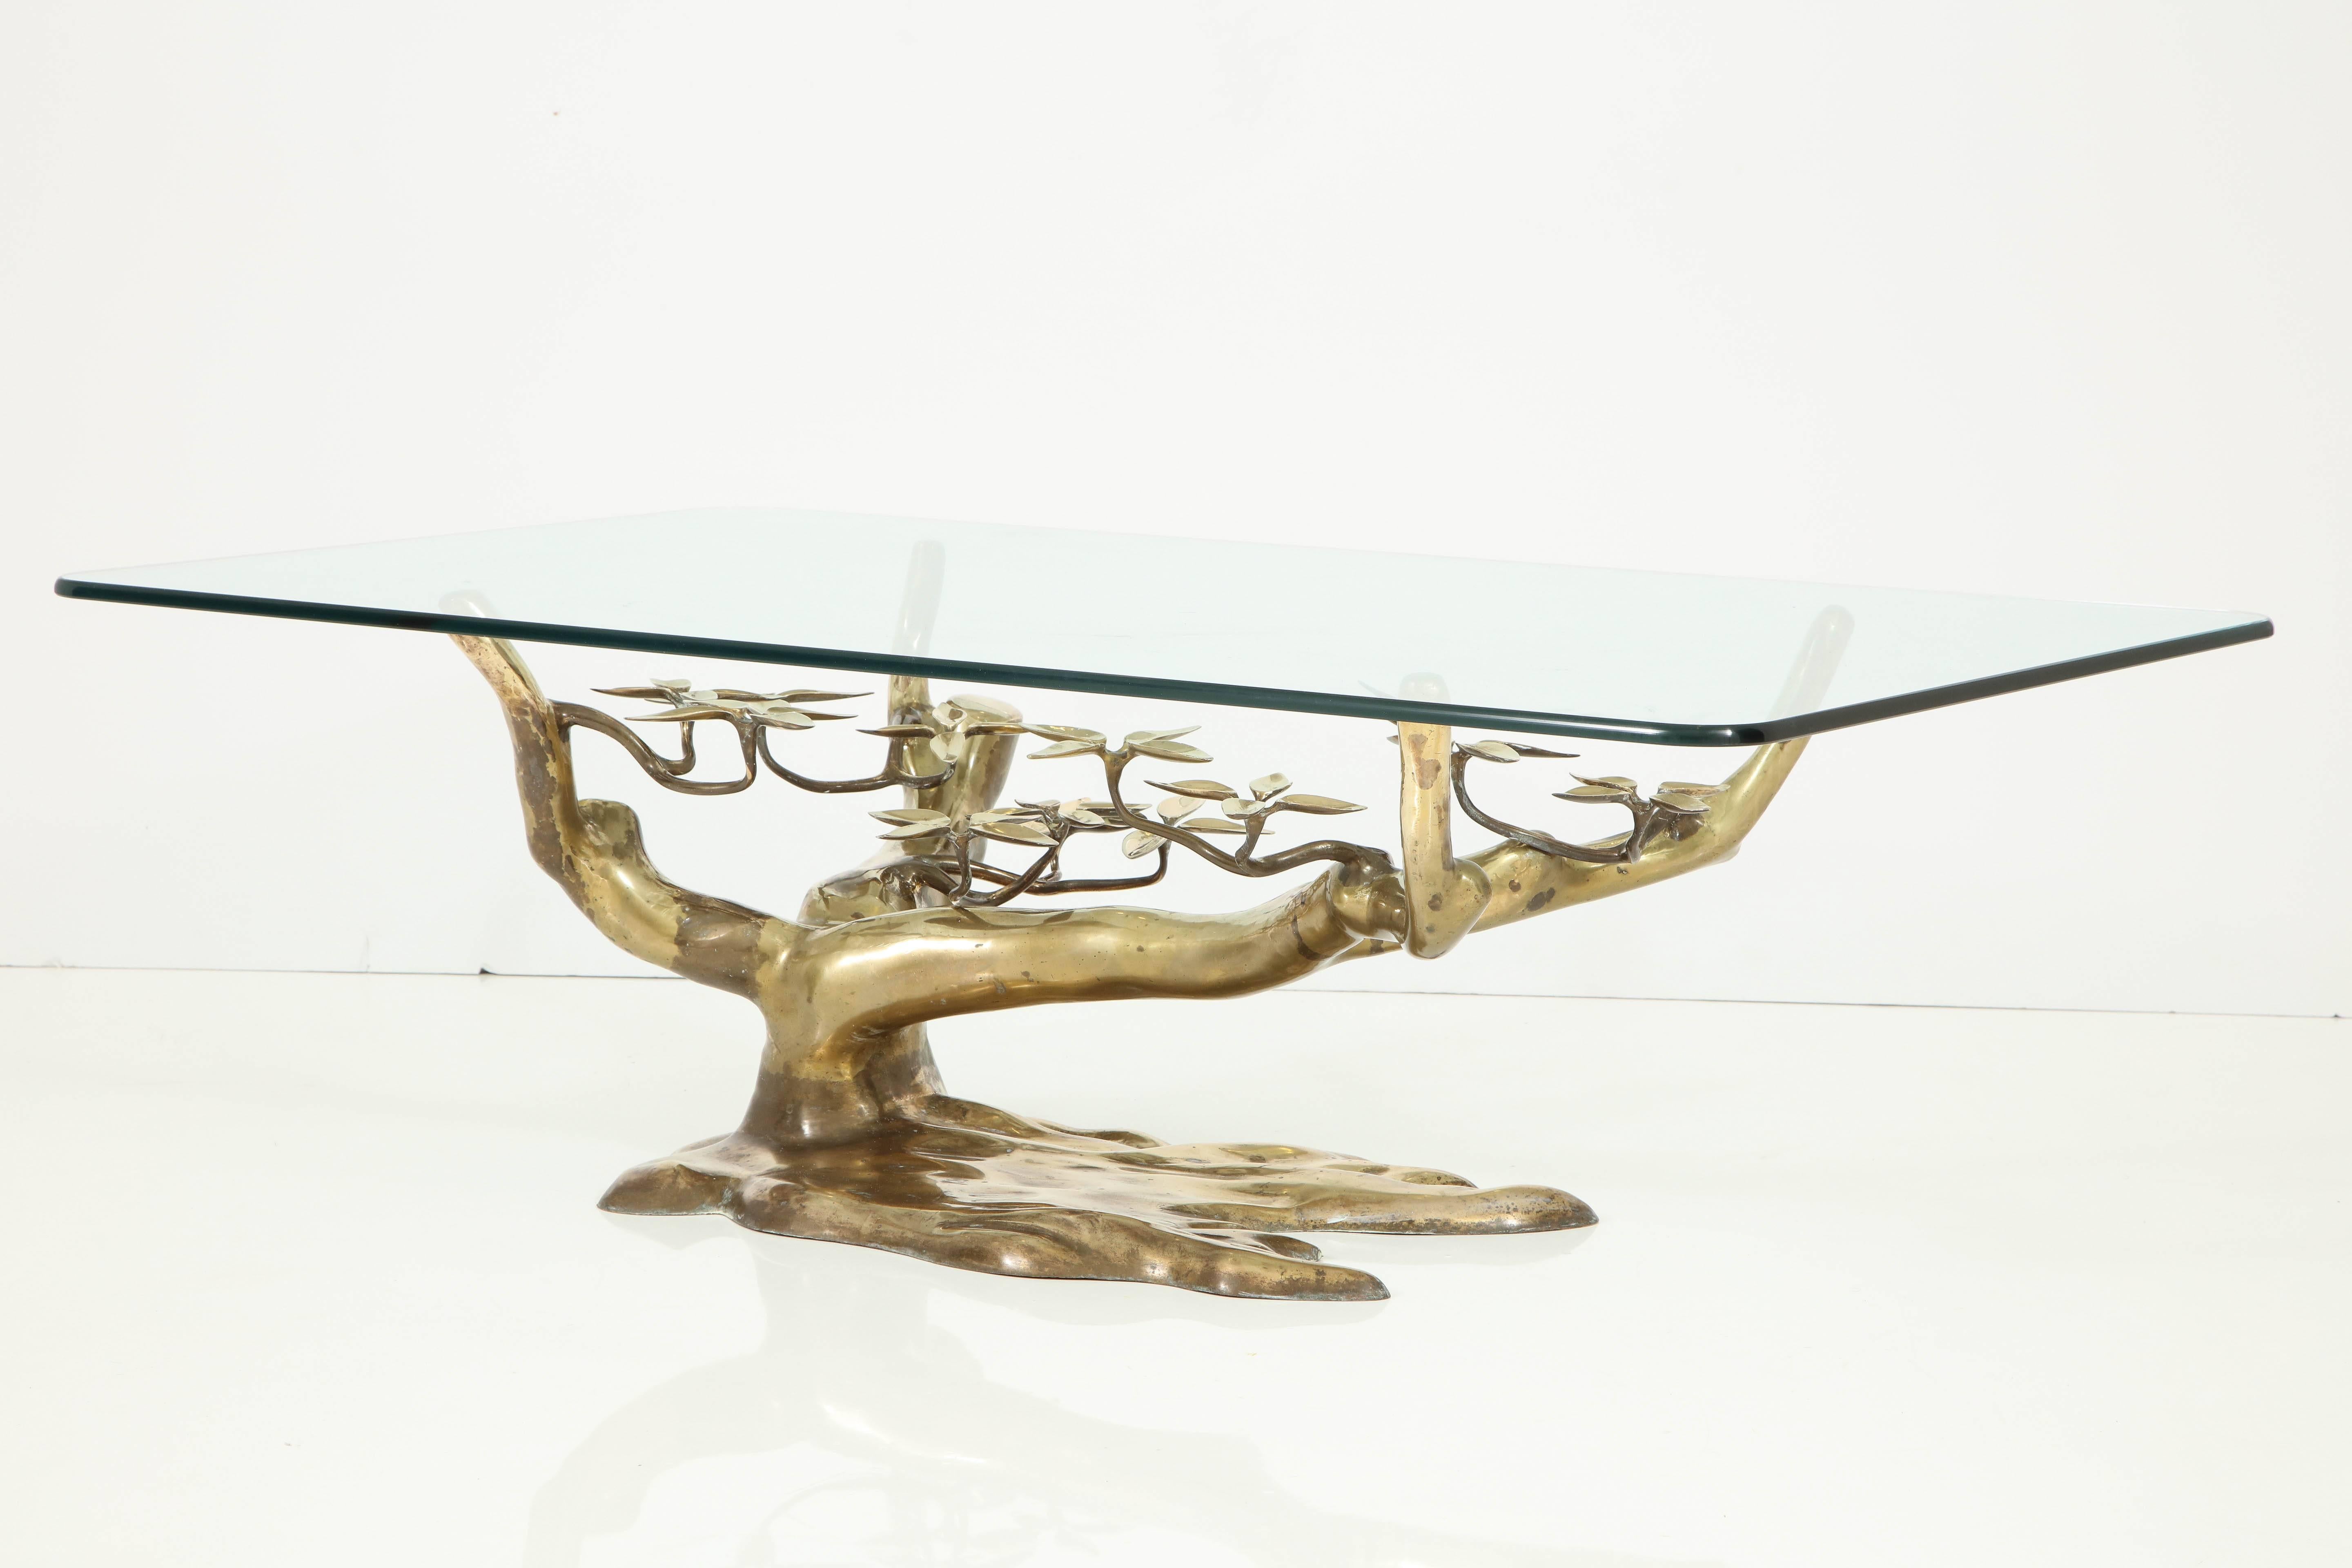 This piece is a show stopper! Attributed to Belgian designer Willy Daro, the table features a sculptural brass base with branches and leaves, under a large glass top. The table is a work of art, and is pretty to look at from all angles.